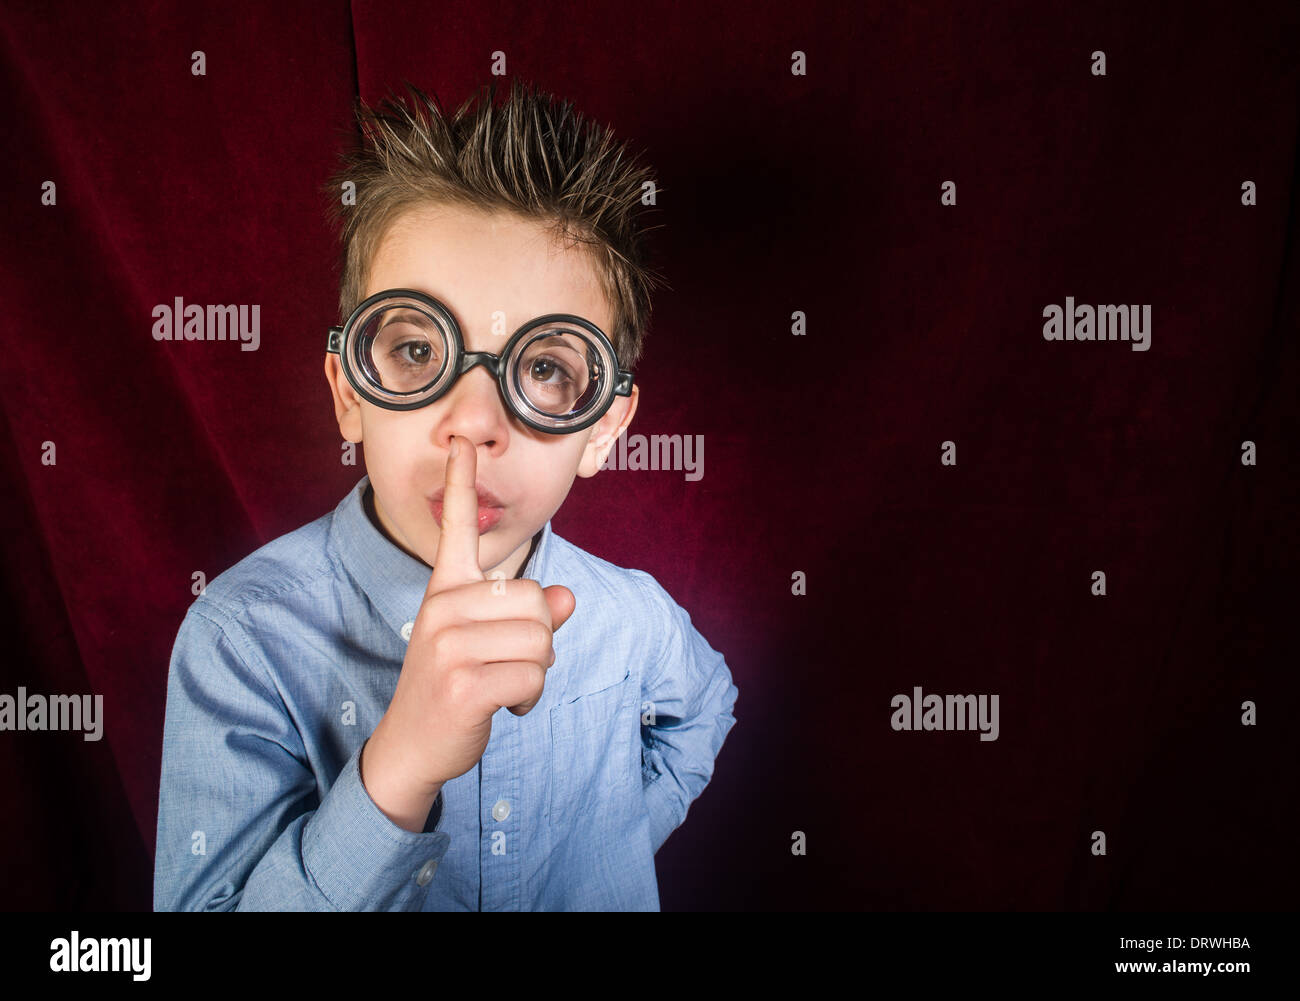 Child with big glasses. Red curtain background Stock Photo